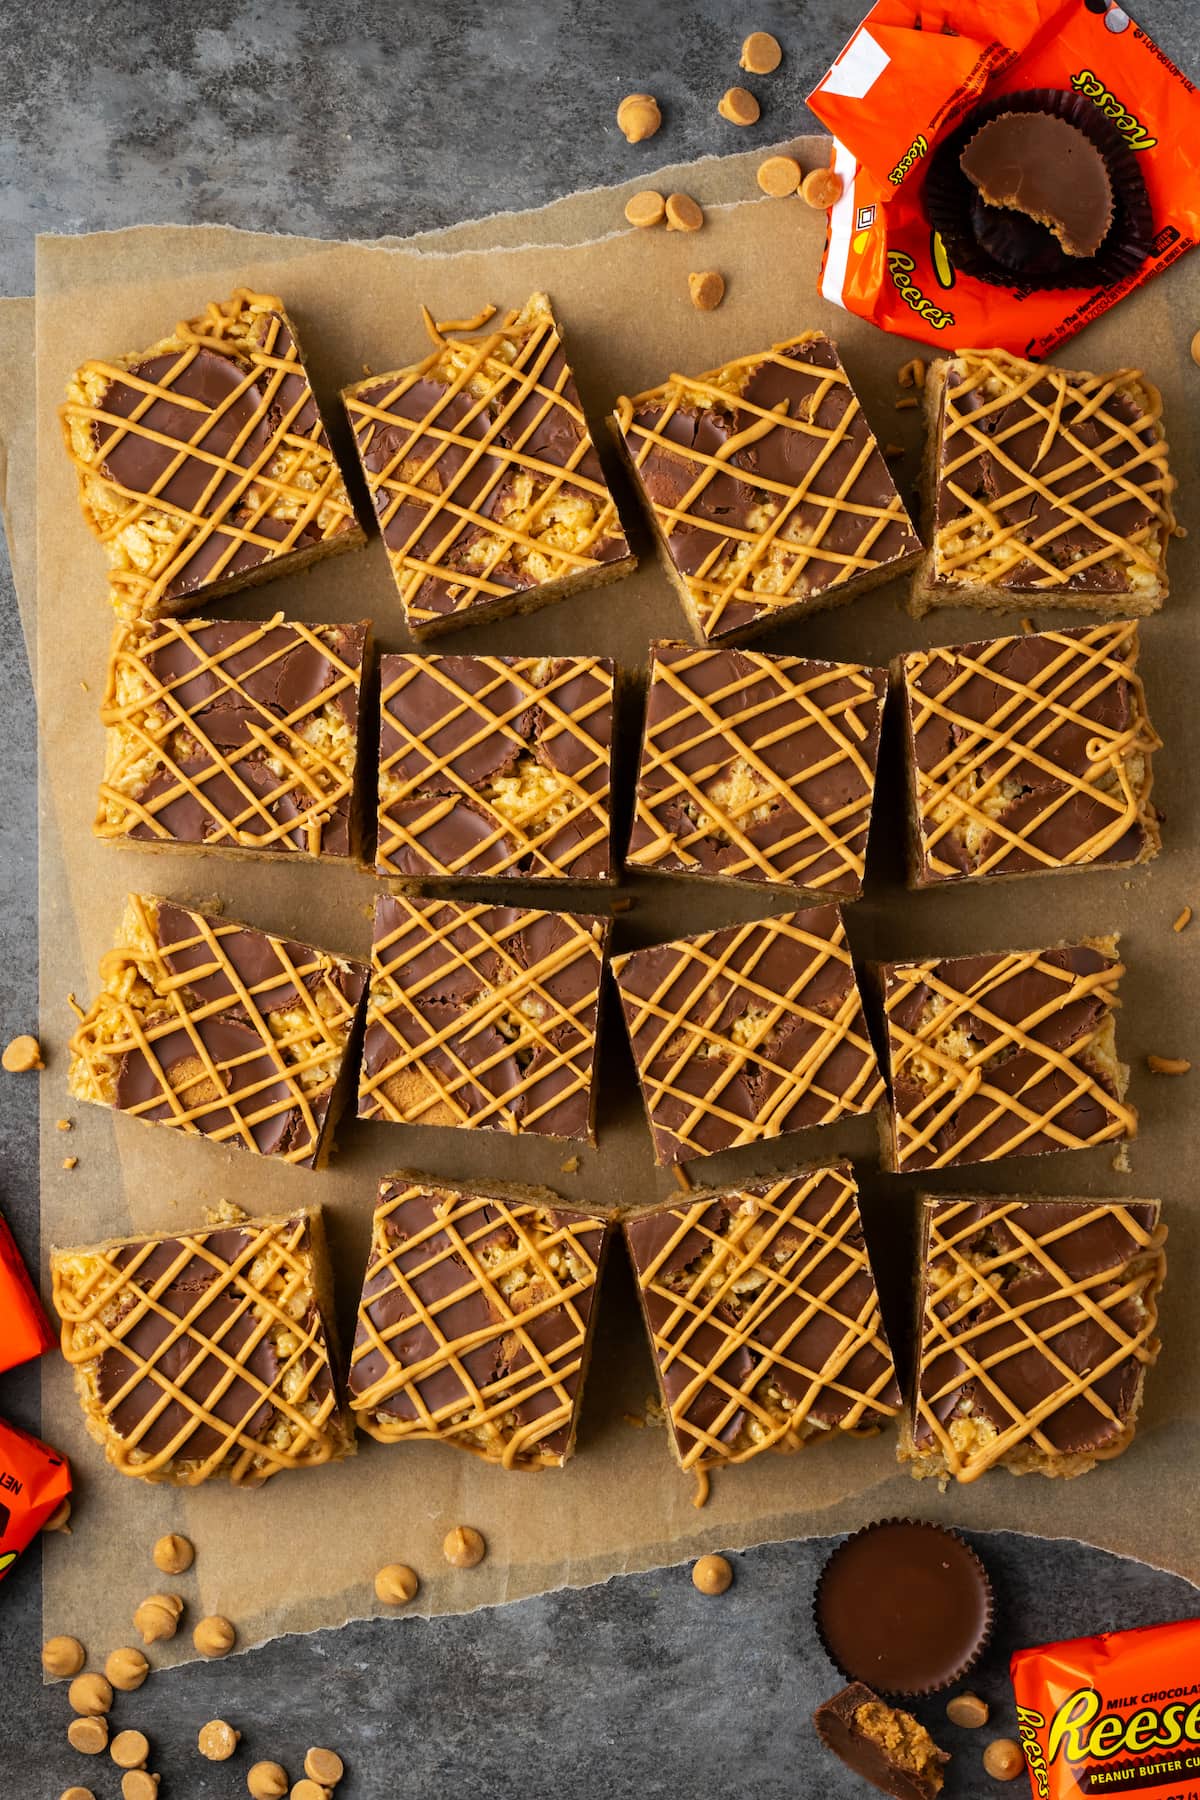 Overhead view of peanut butter rice krispie treats cut into squares next to partially unwrapped Reese's peanut butter cups.